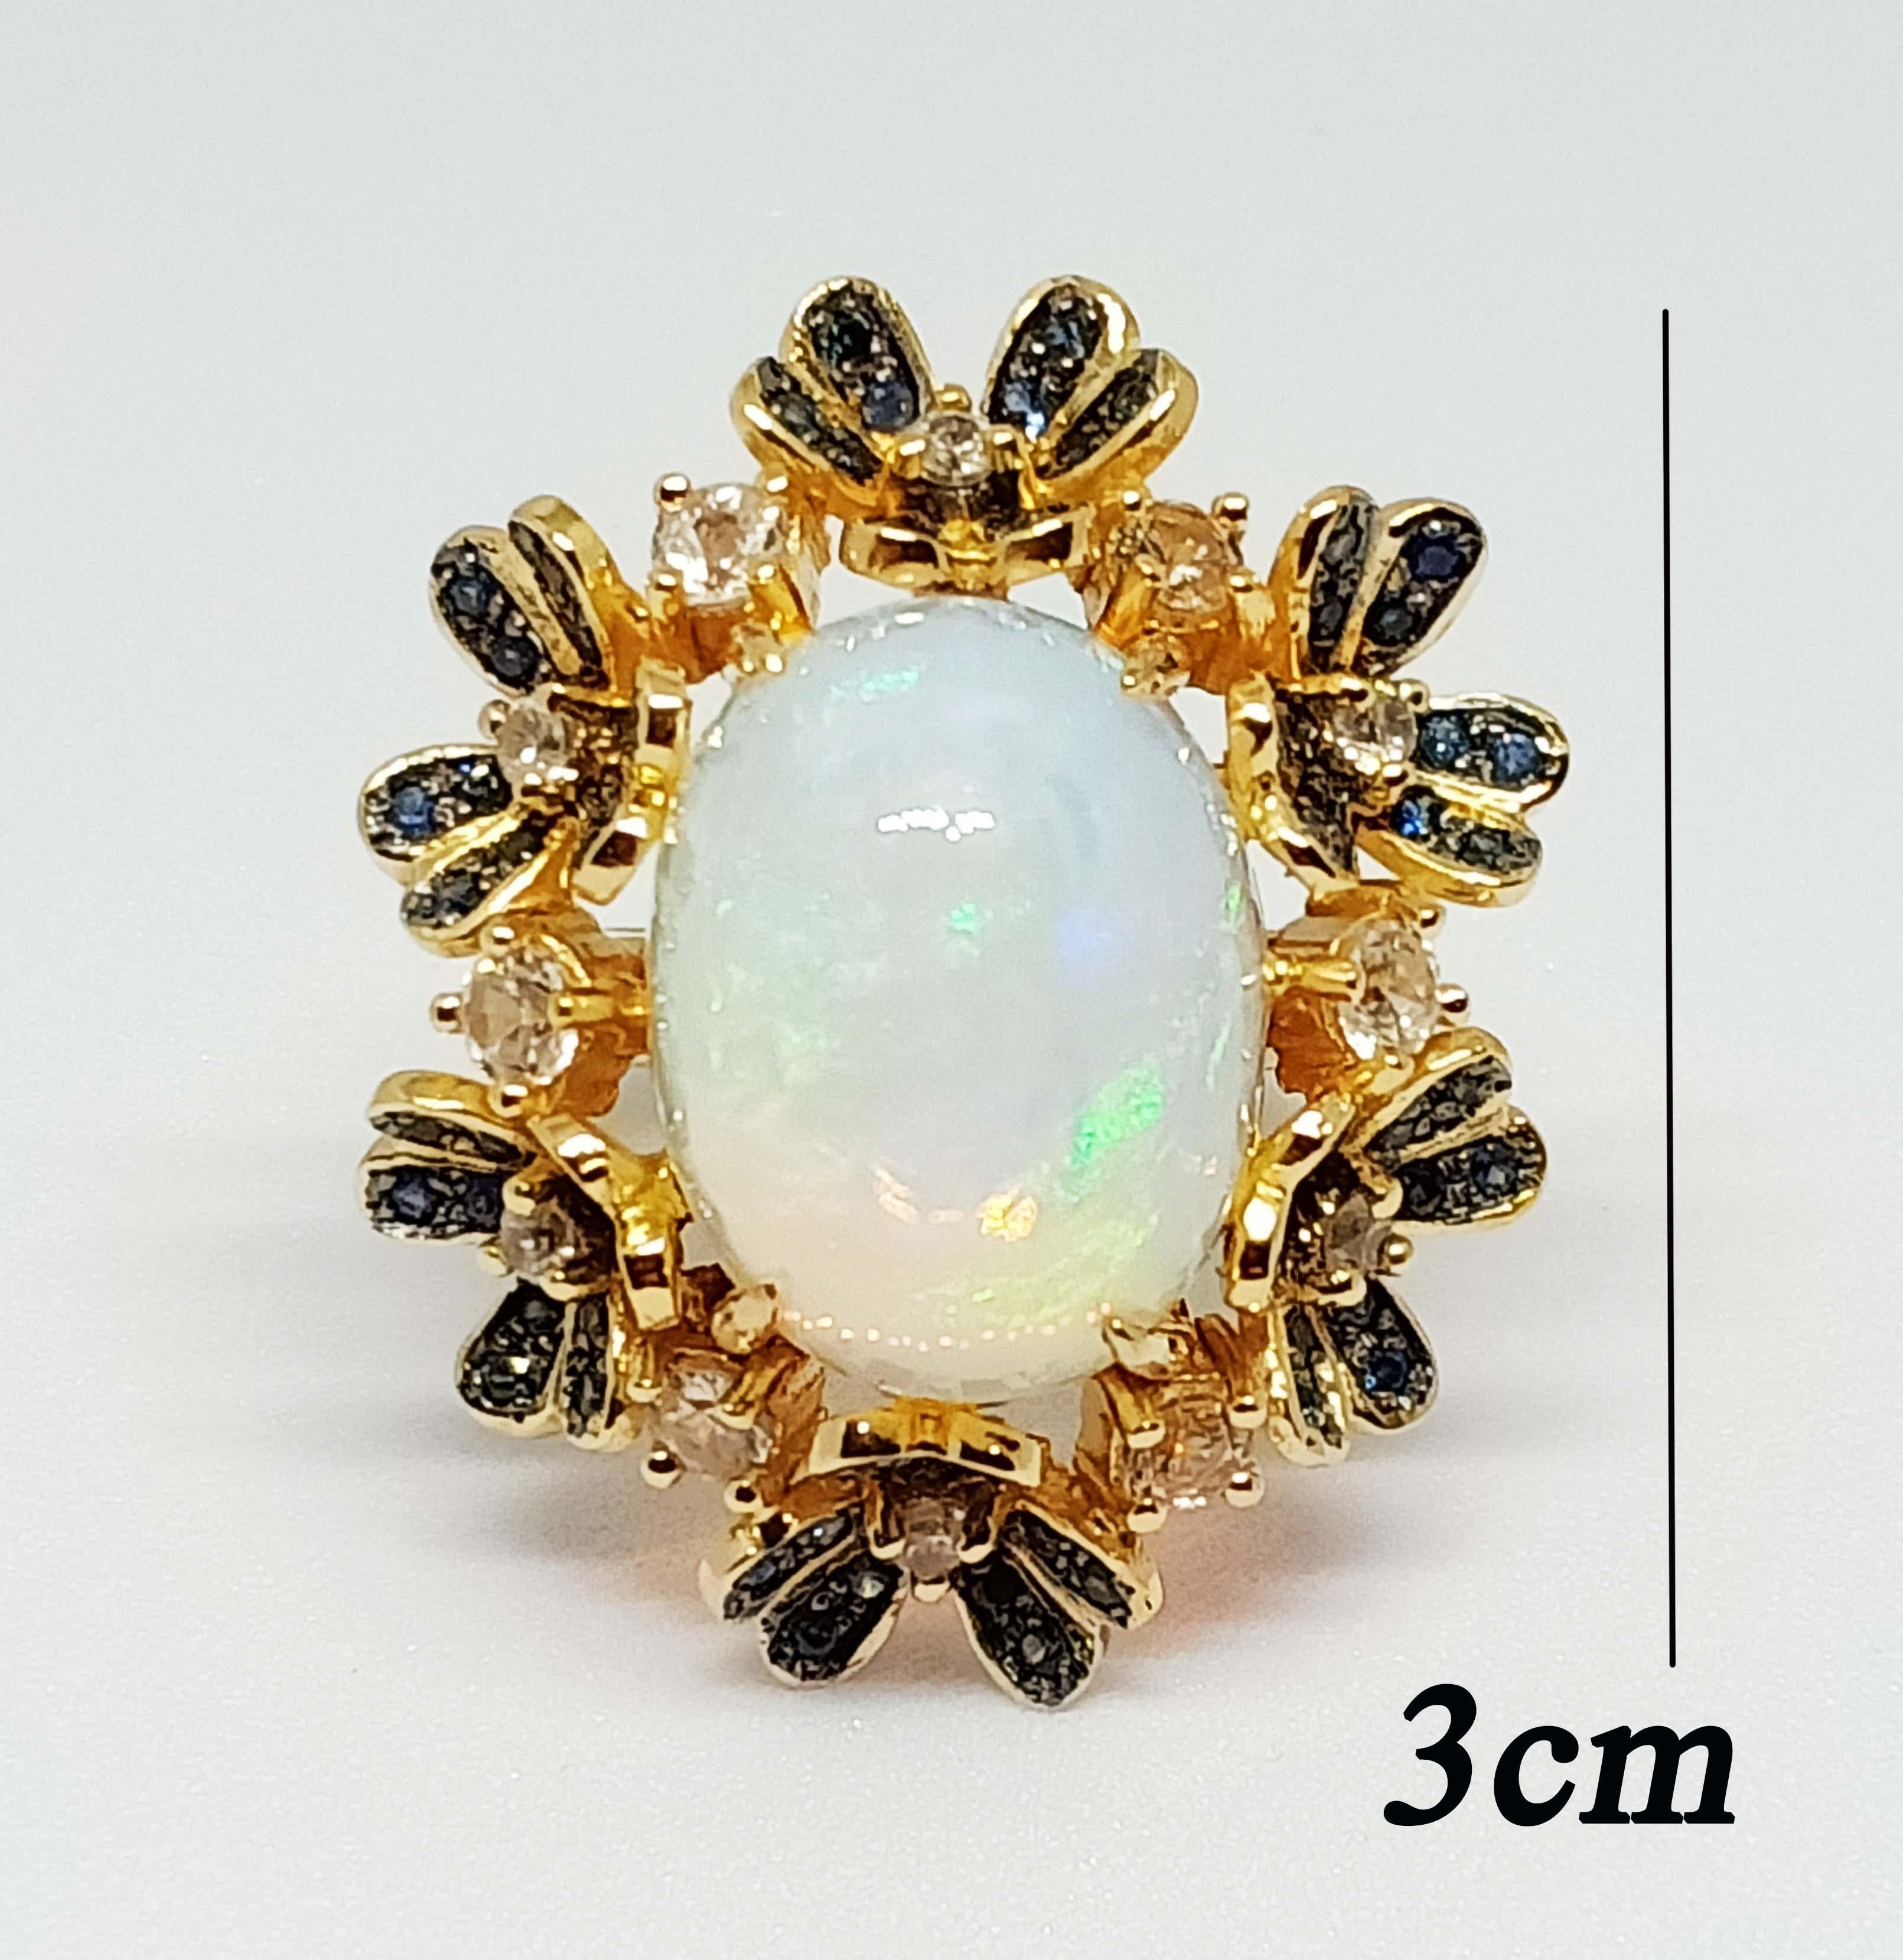 ( Big Ring )Opal flowers garden ring
Opal cabochon Oval size 17x13 mm. (10.80 cts.)
Blue sapphire 1.30 mm. 72 pcs. pave setting on black rhodium
White zircon 2.0 mm. 
White zircon 3.0 mm.
18 K Gold Plated Over Sterling Silver.

Search Sellers ,